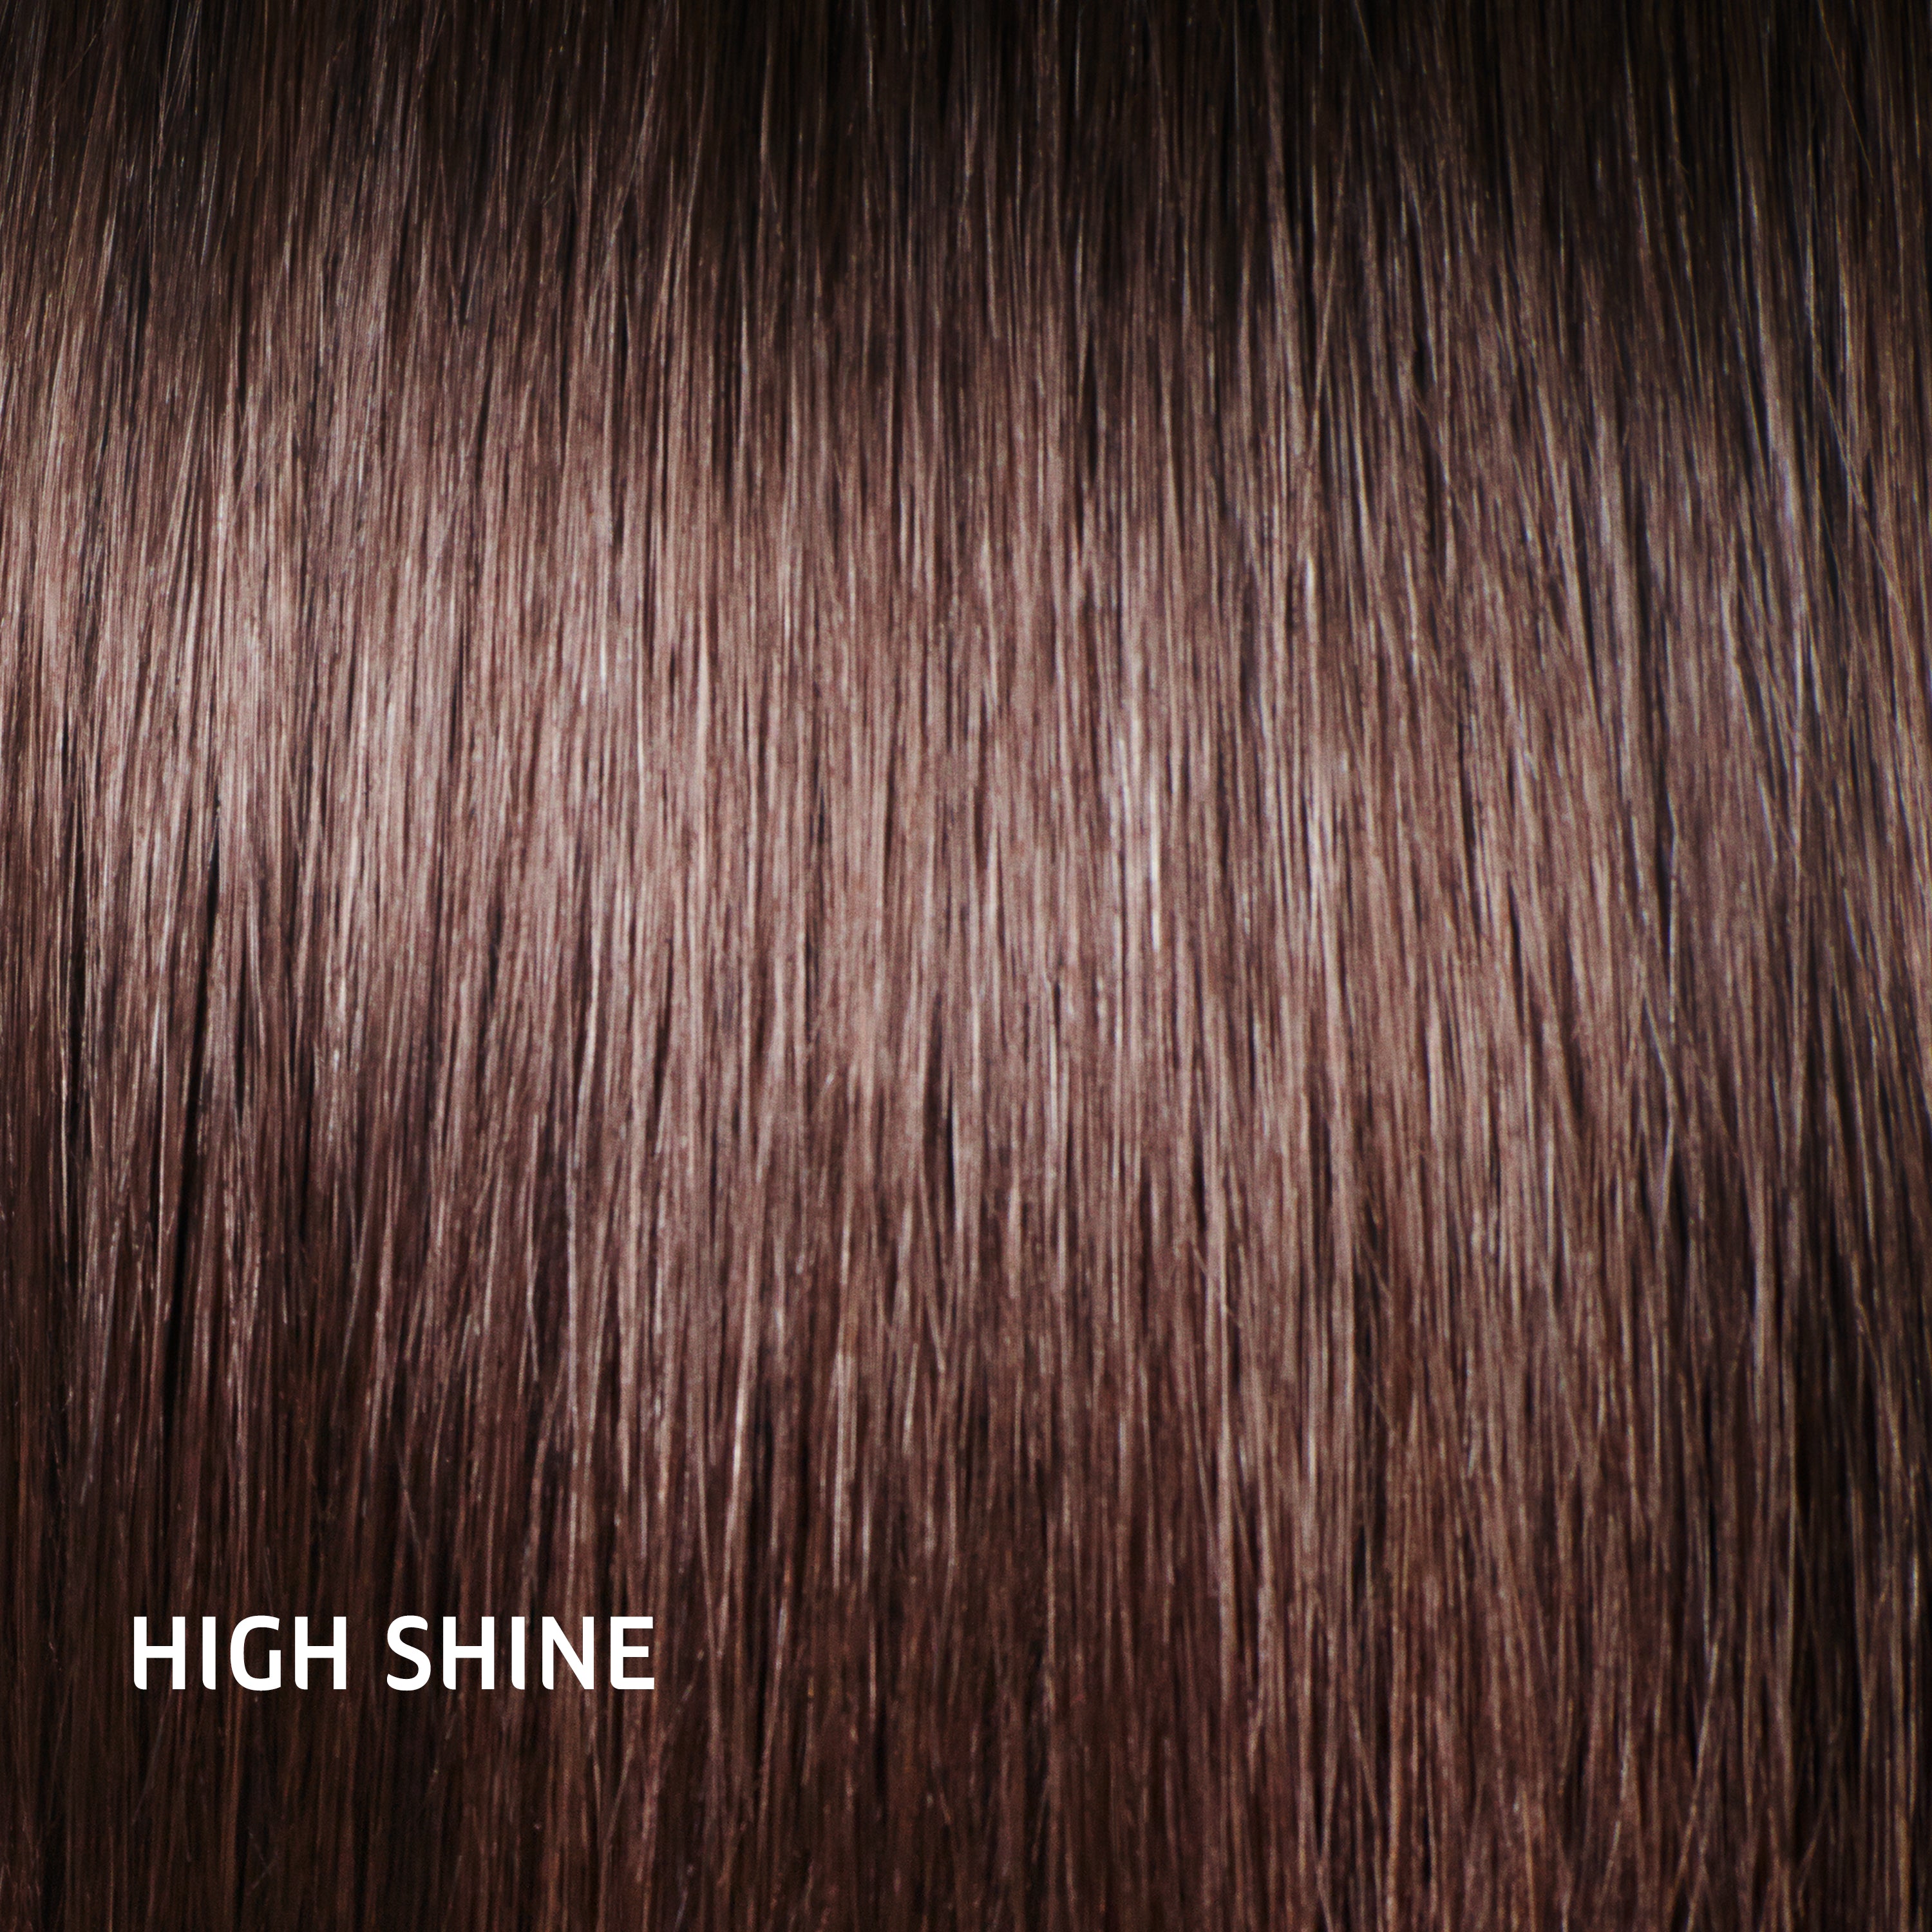 Wella Professional Color Touch Rich Naturals 7/86